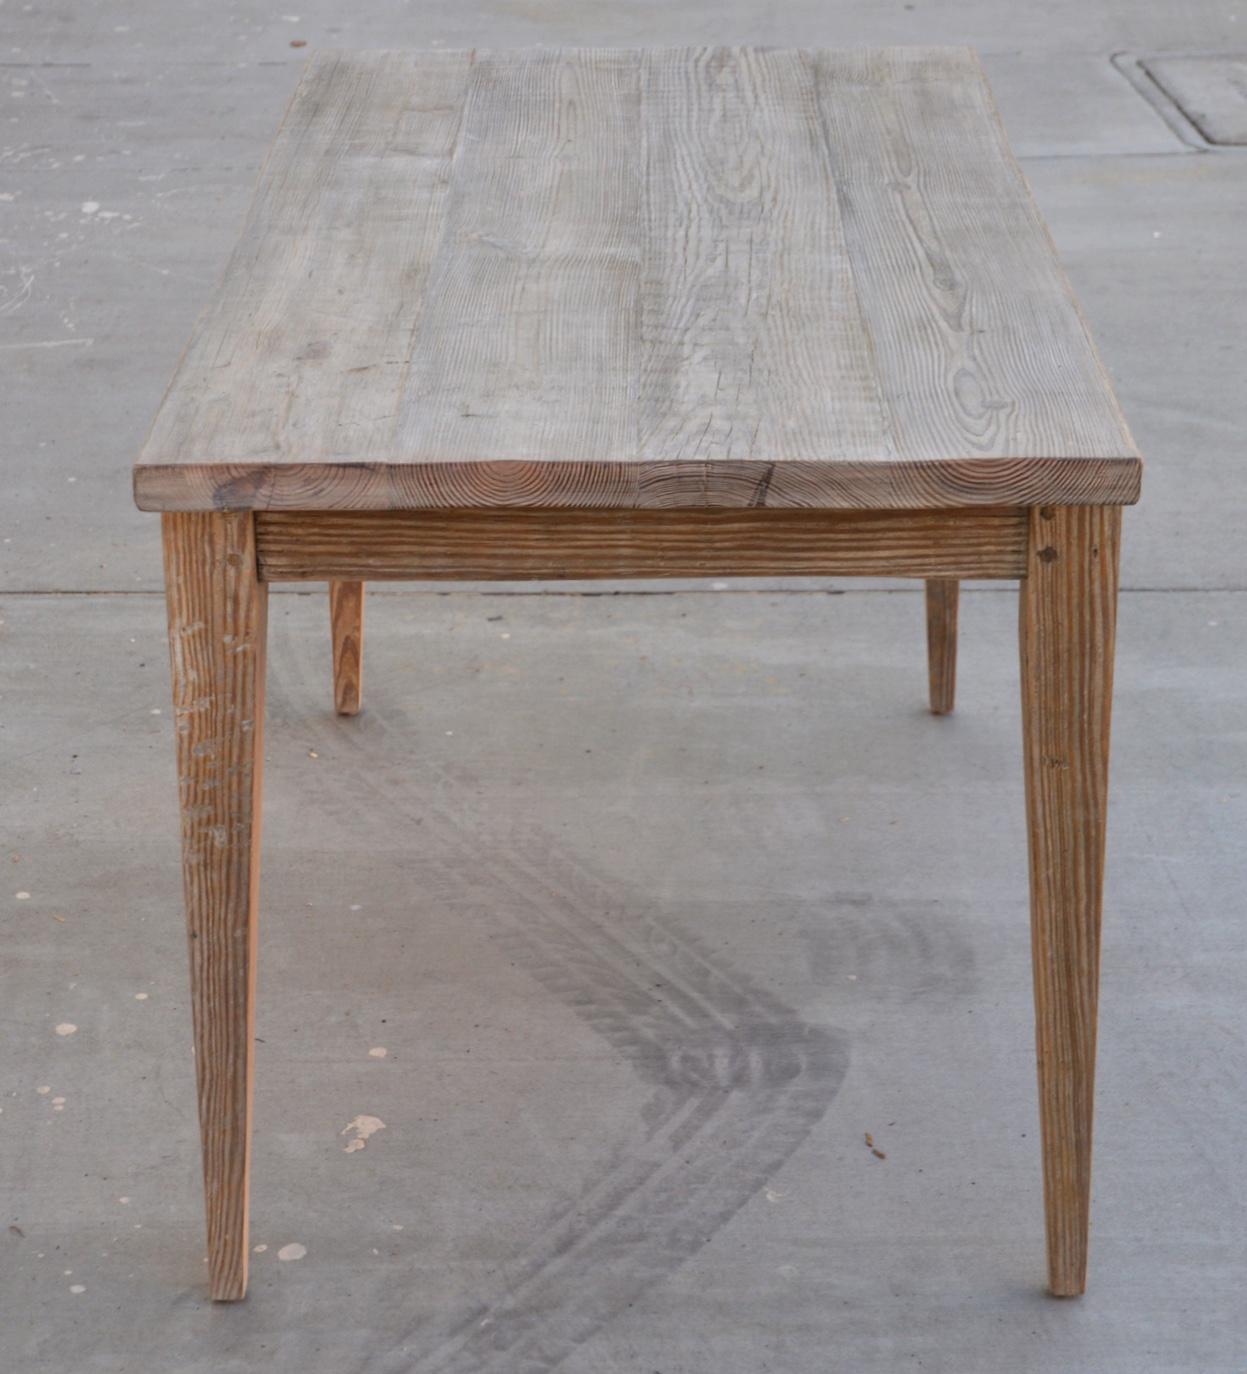 English Harvest Table Made from Reclaimed Pine